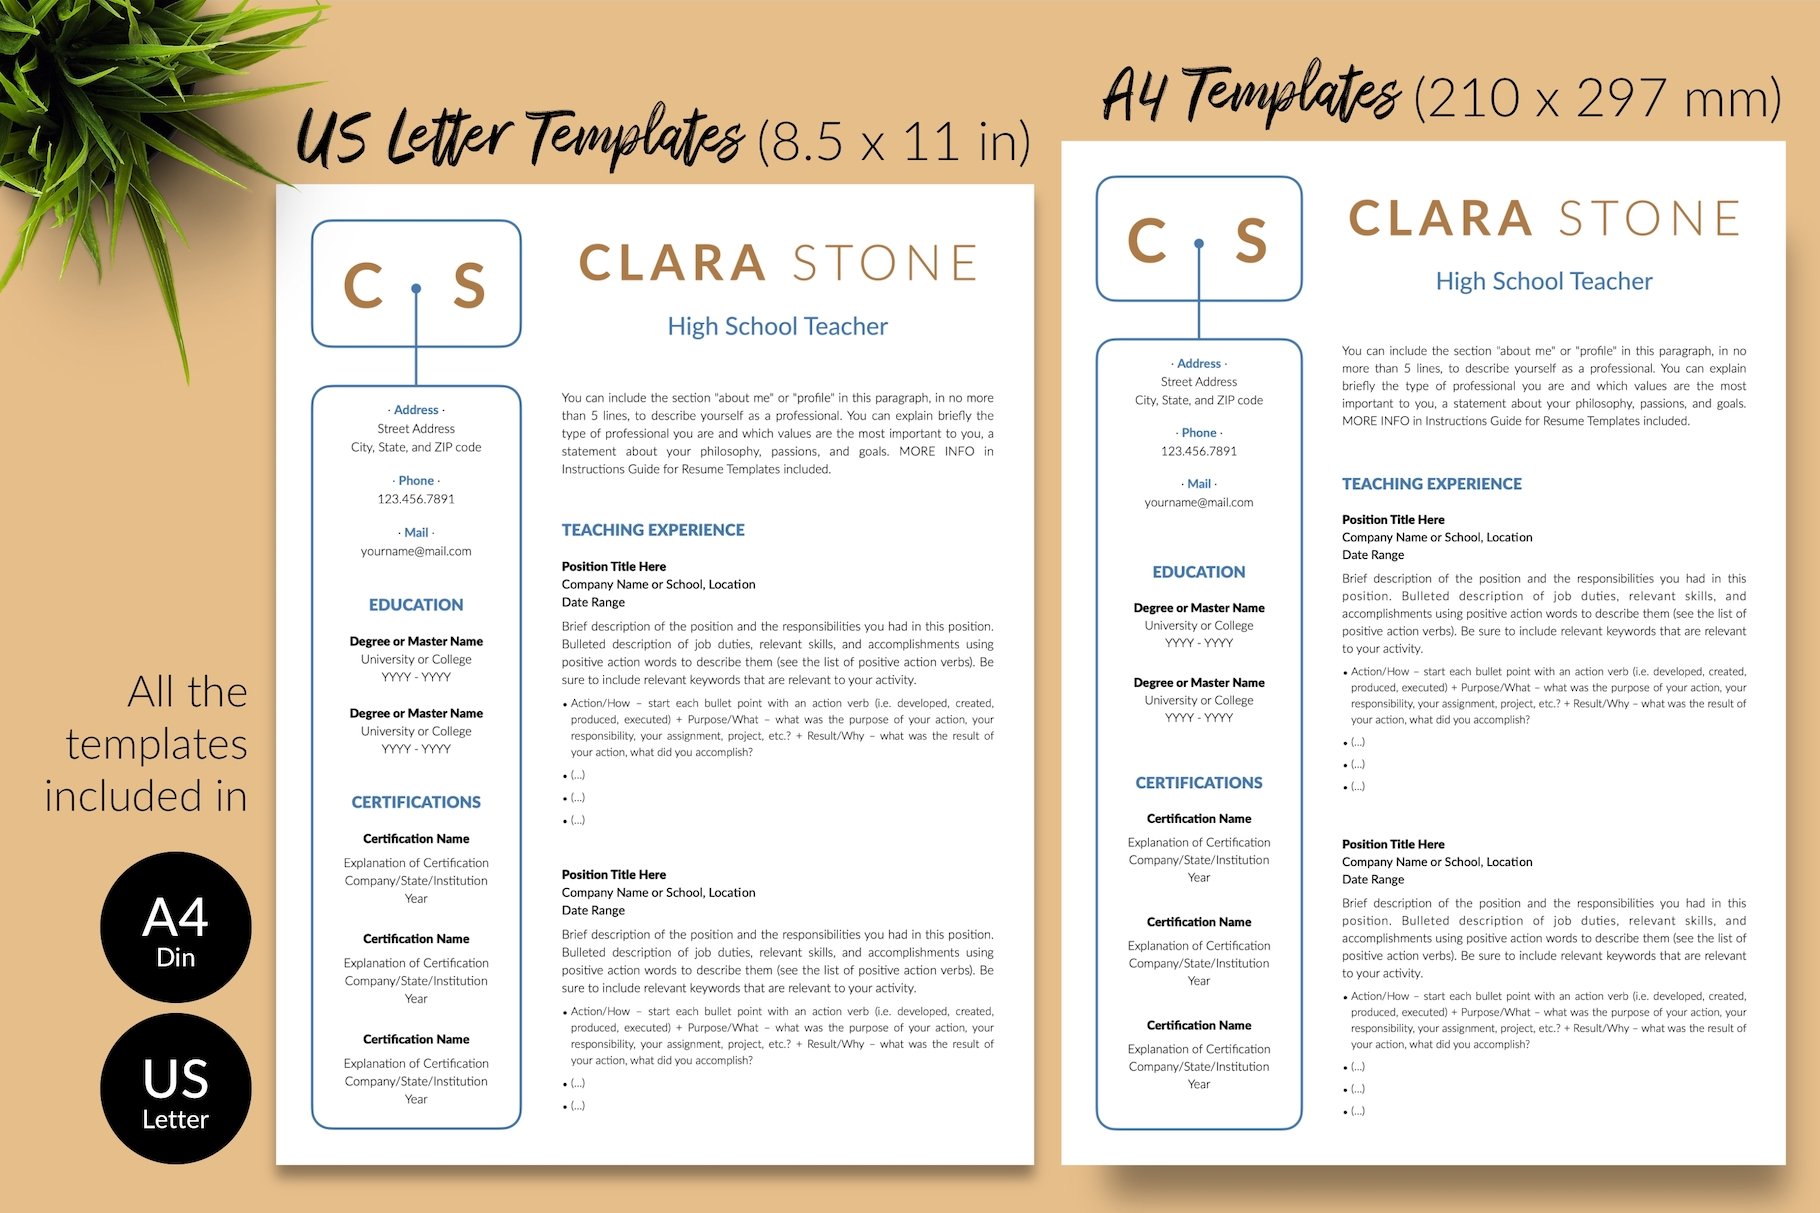 resume cv template clara stone for creative market 08 size din a4 us letter 986